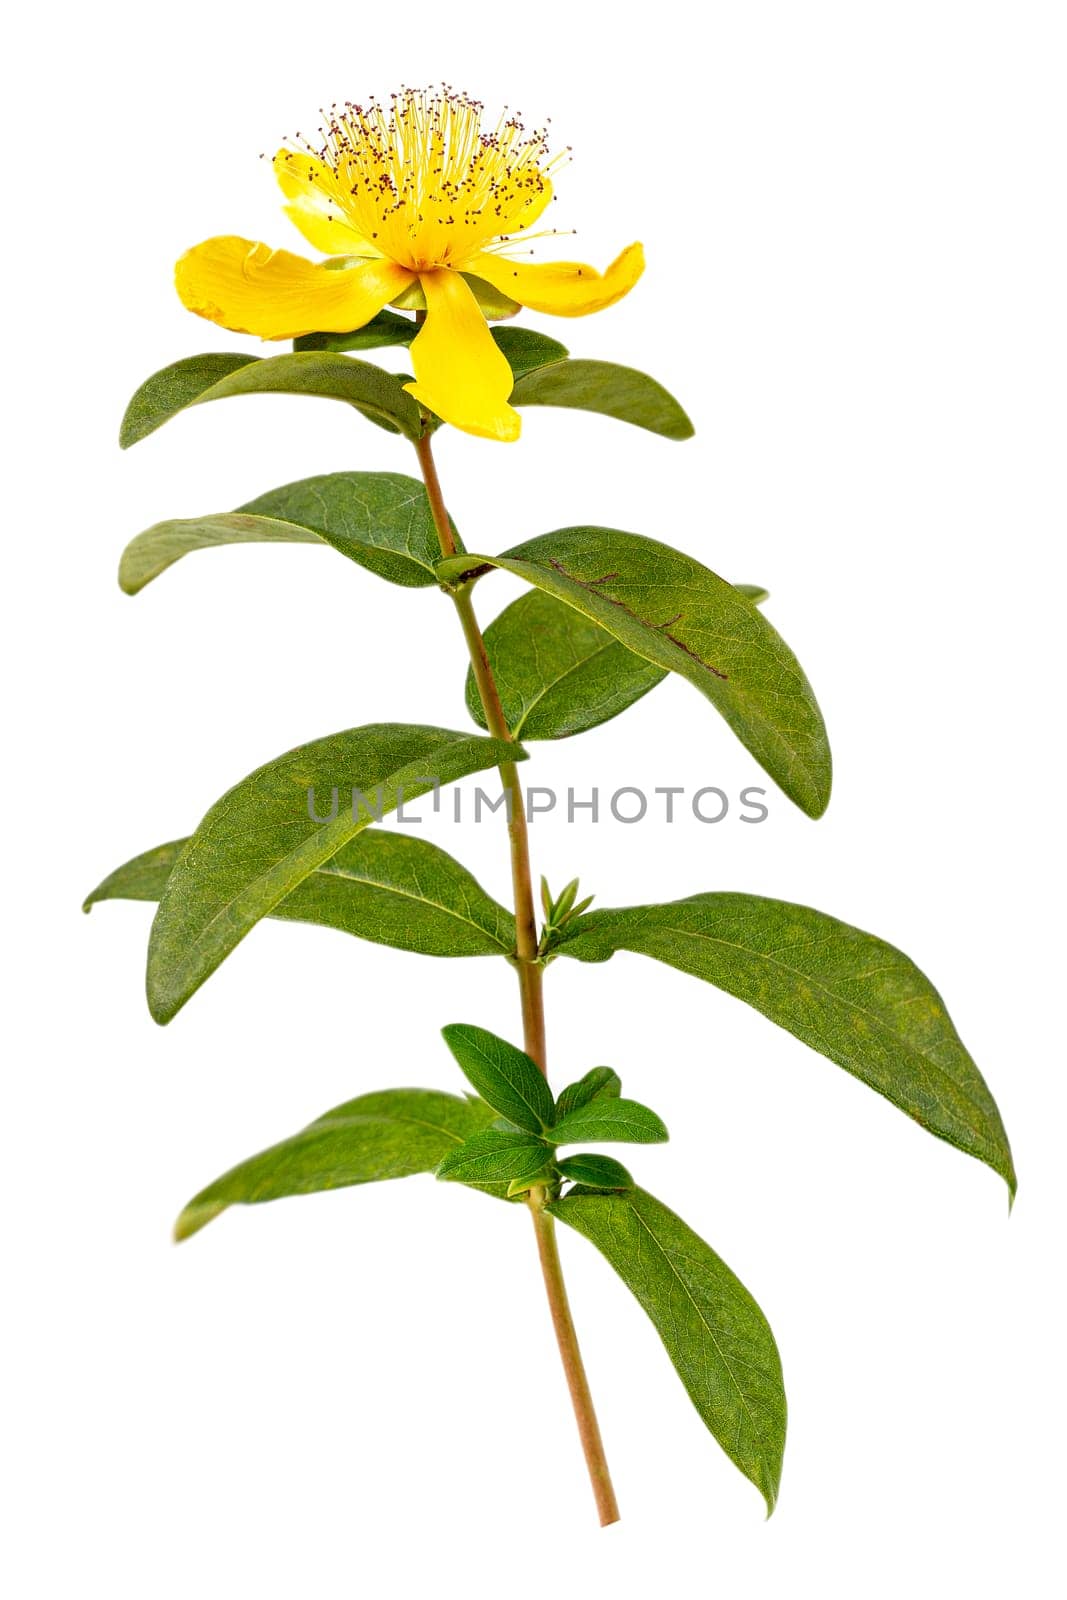 Perforate St John's-Wort Flowers Isolated on White Background.